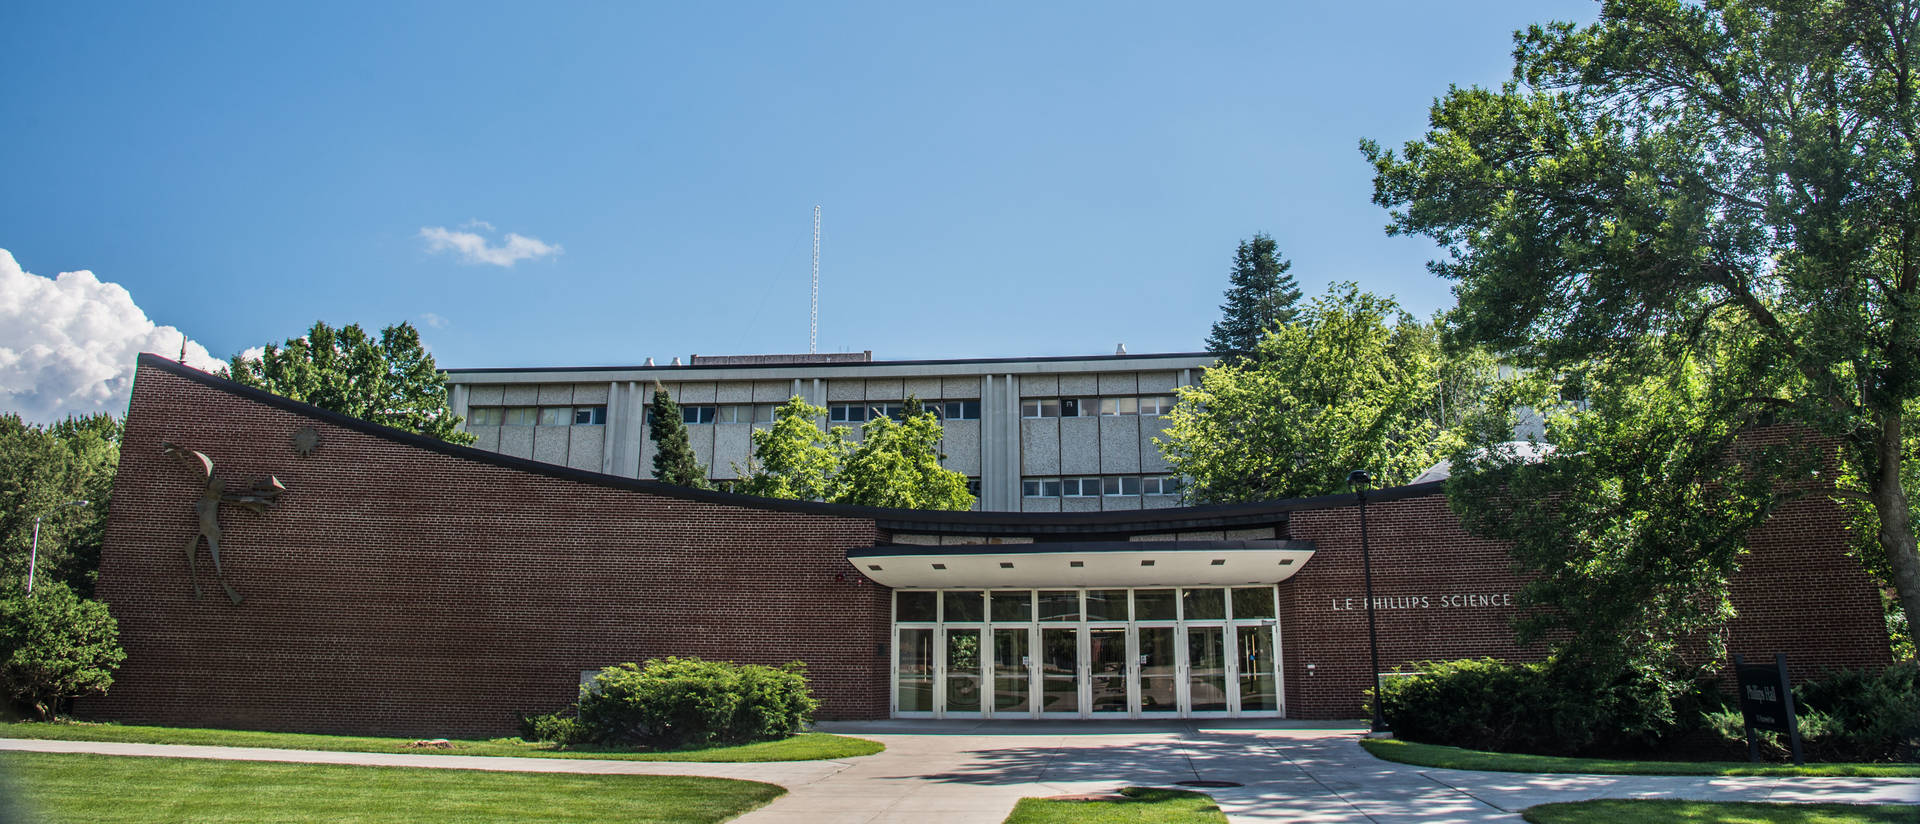 Phillips Science Hall at UW-Eau Claire 